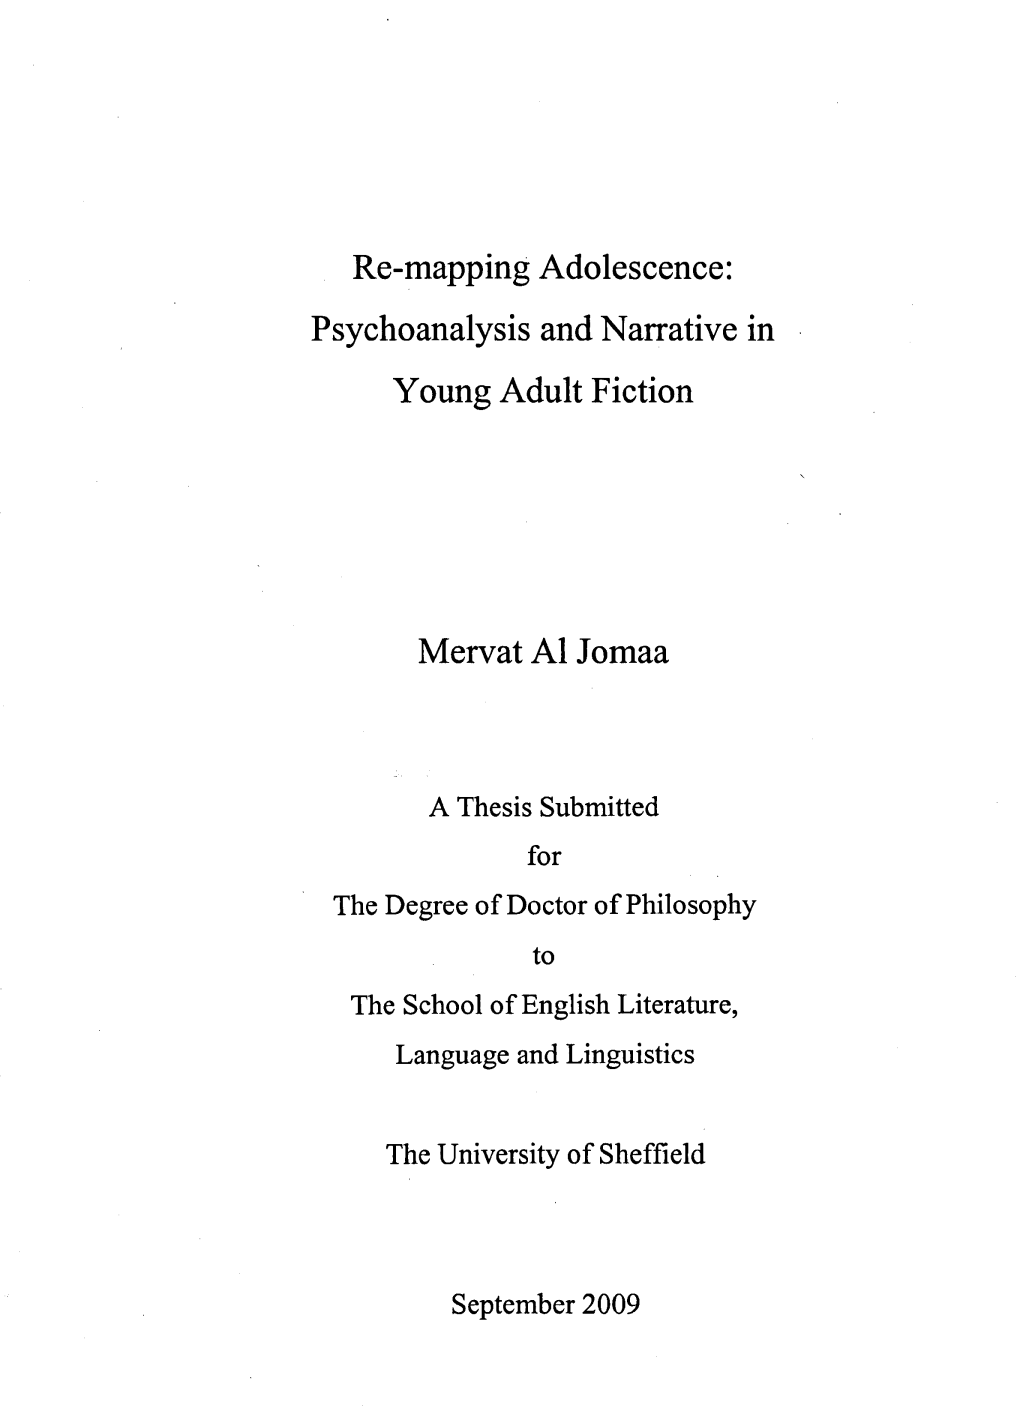 Psychoanalysis and Narrative in Young Adult Fiction